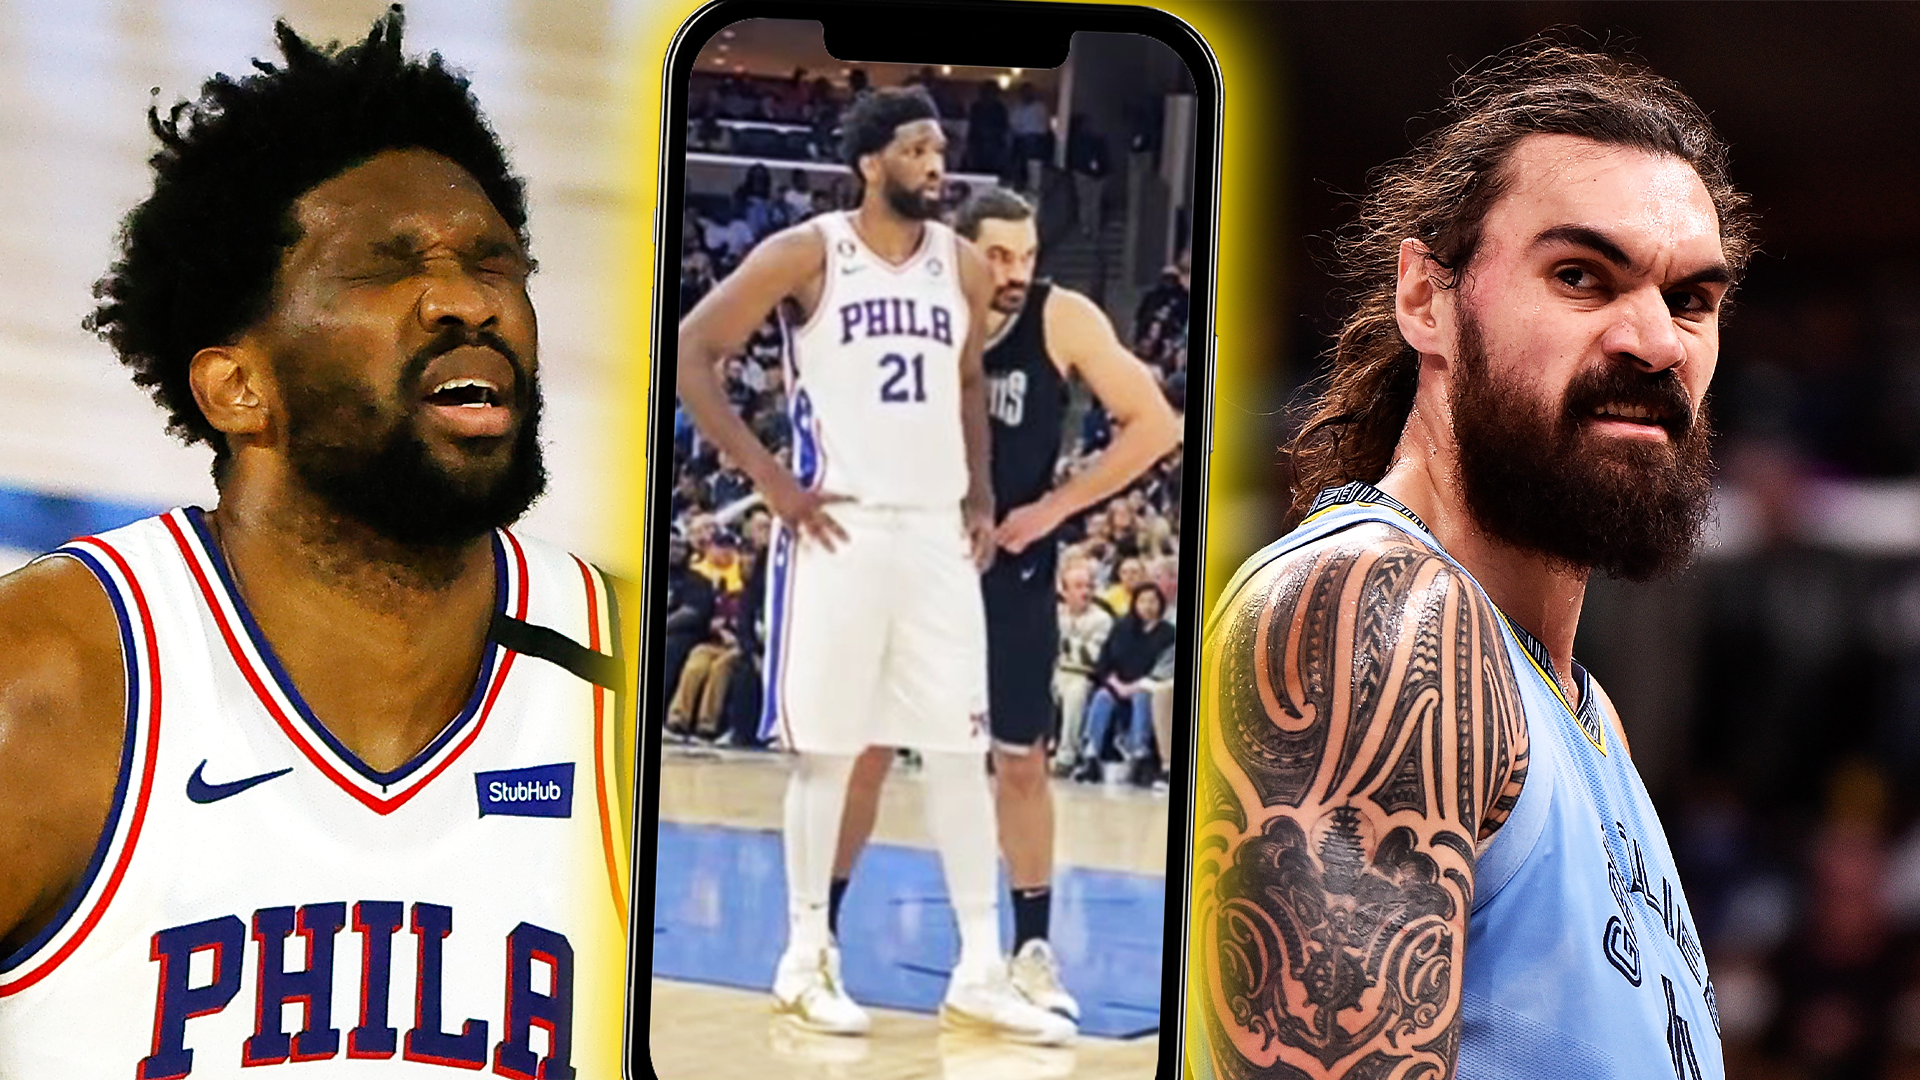 Steven Adams through the years! All grown up now‼️